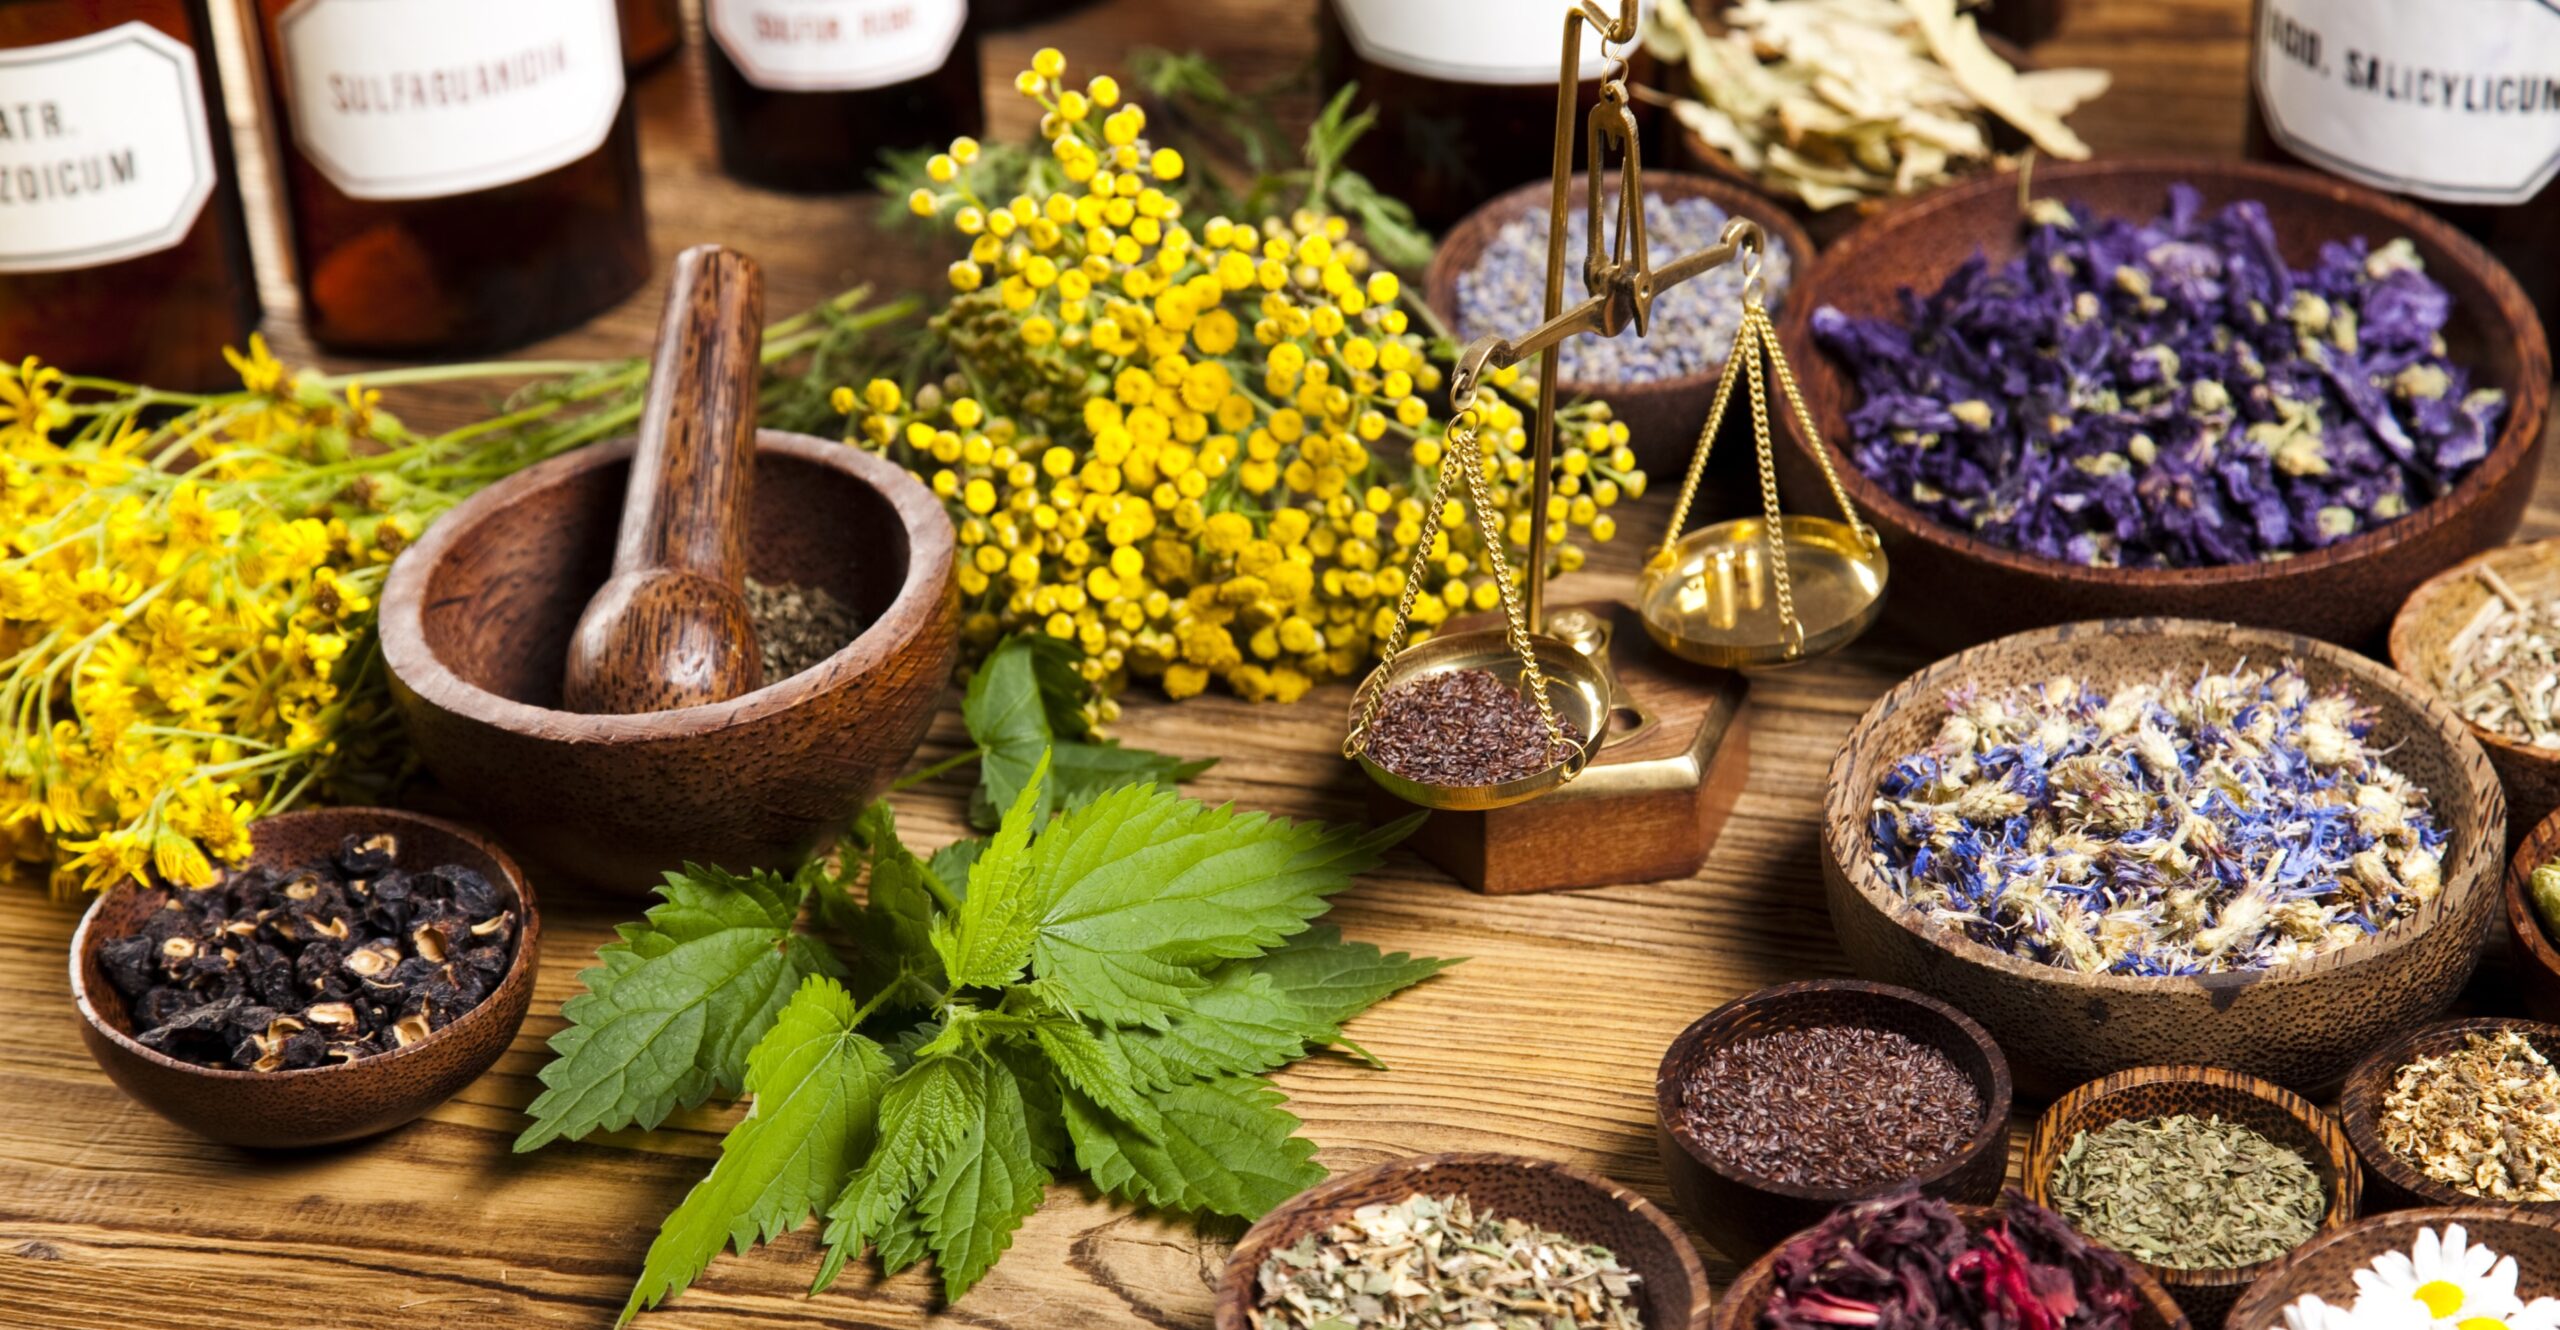 Medicinal Herbs Found to Have Antioxidant & Anti-Tumor Effects